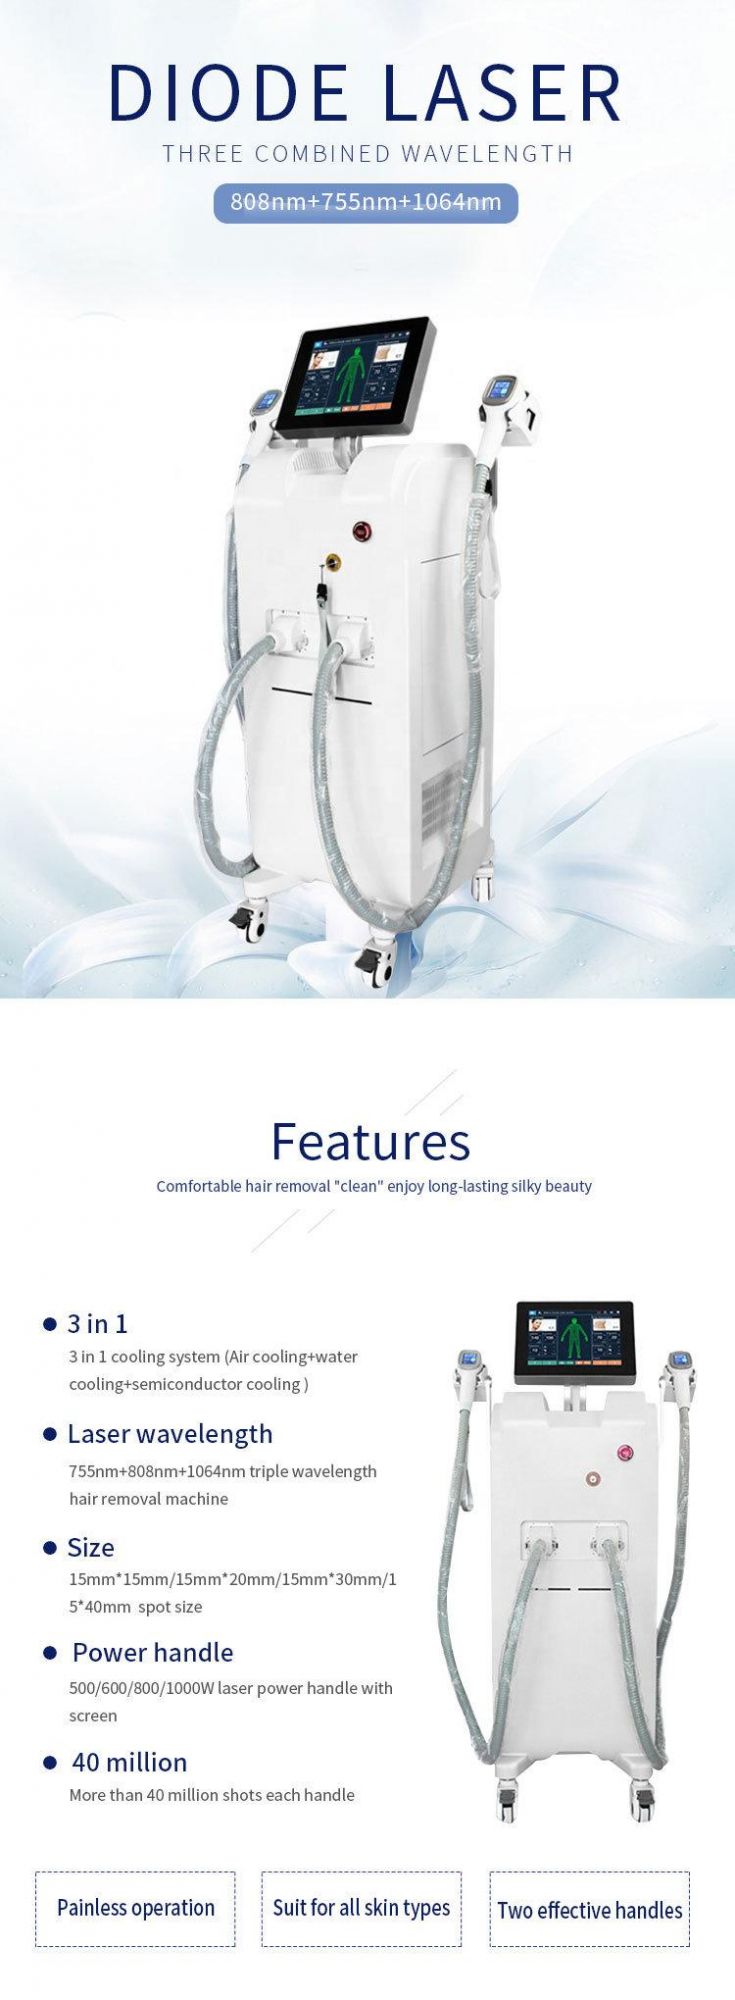 Cheap Price 808 Diode Laser Hair Removal Machine Triple Wavelength 755 808 1064 Diode Laser Hair Removal Machine